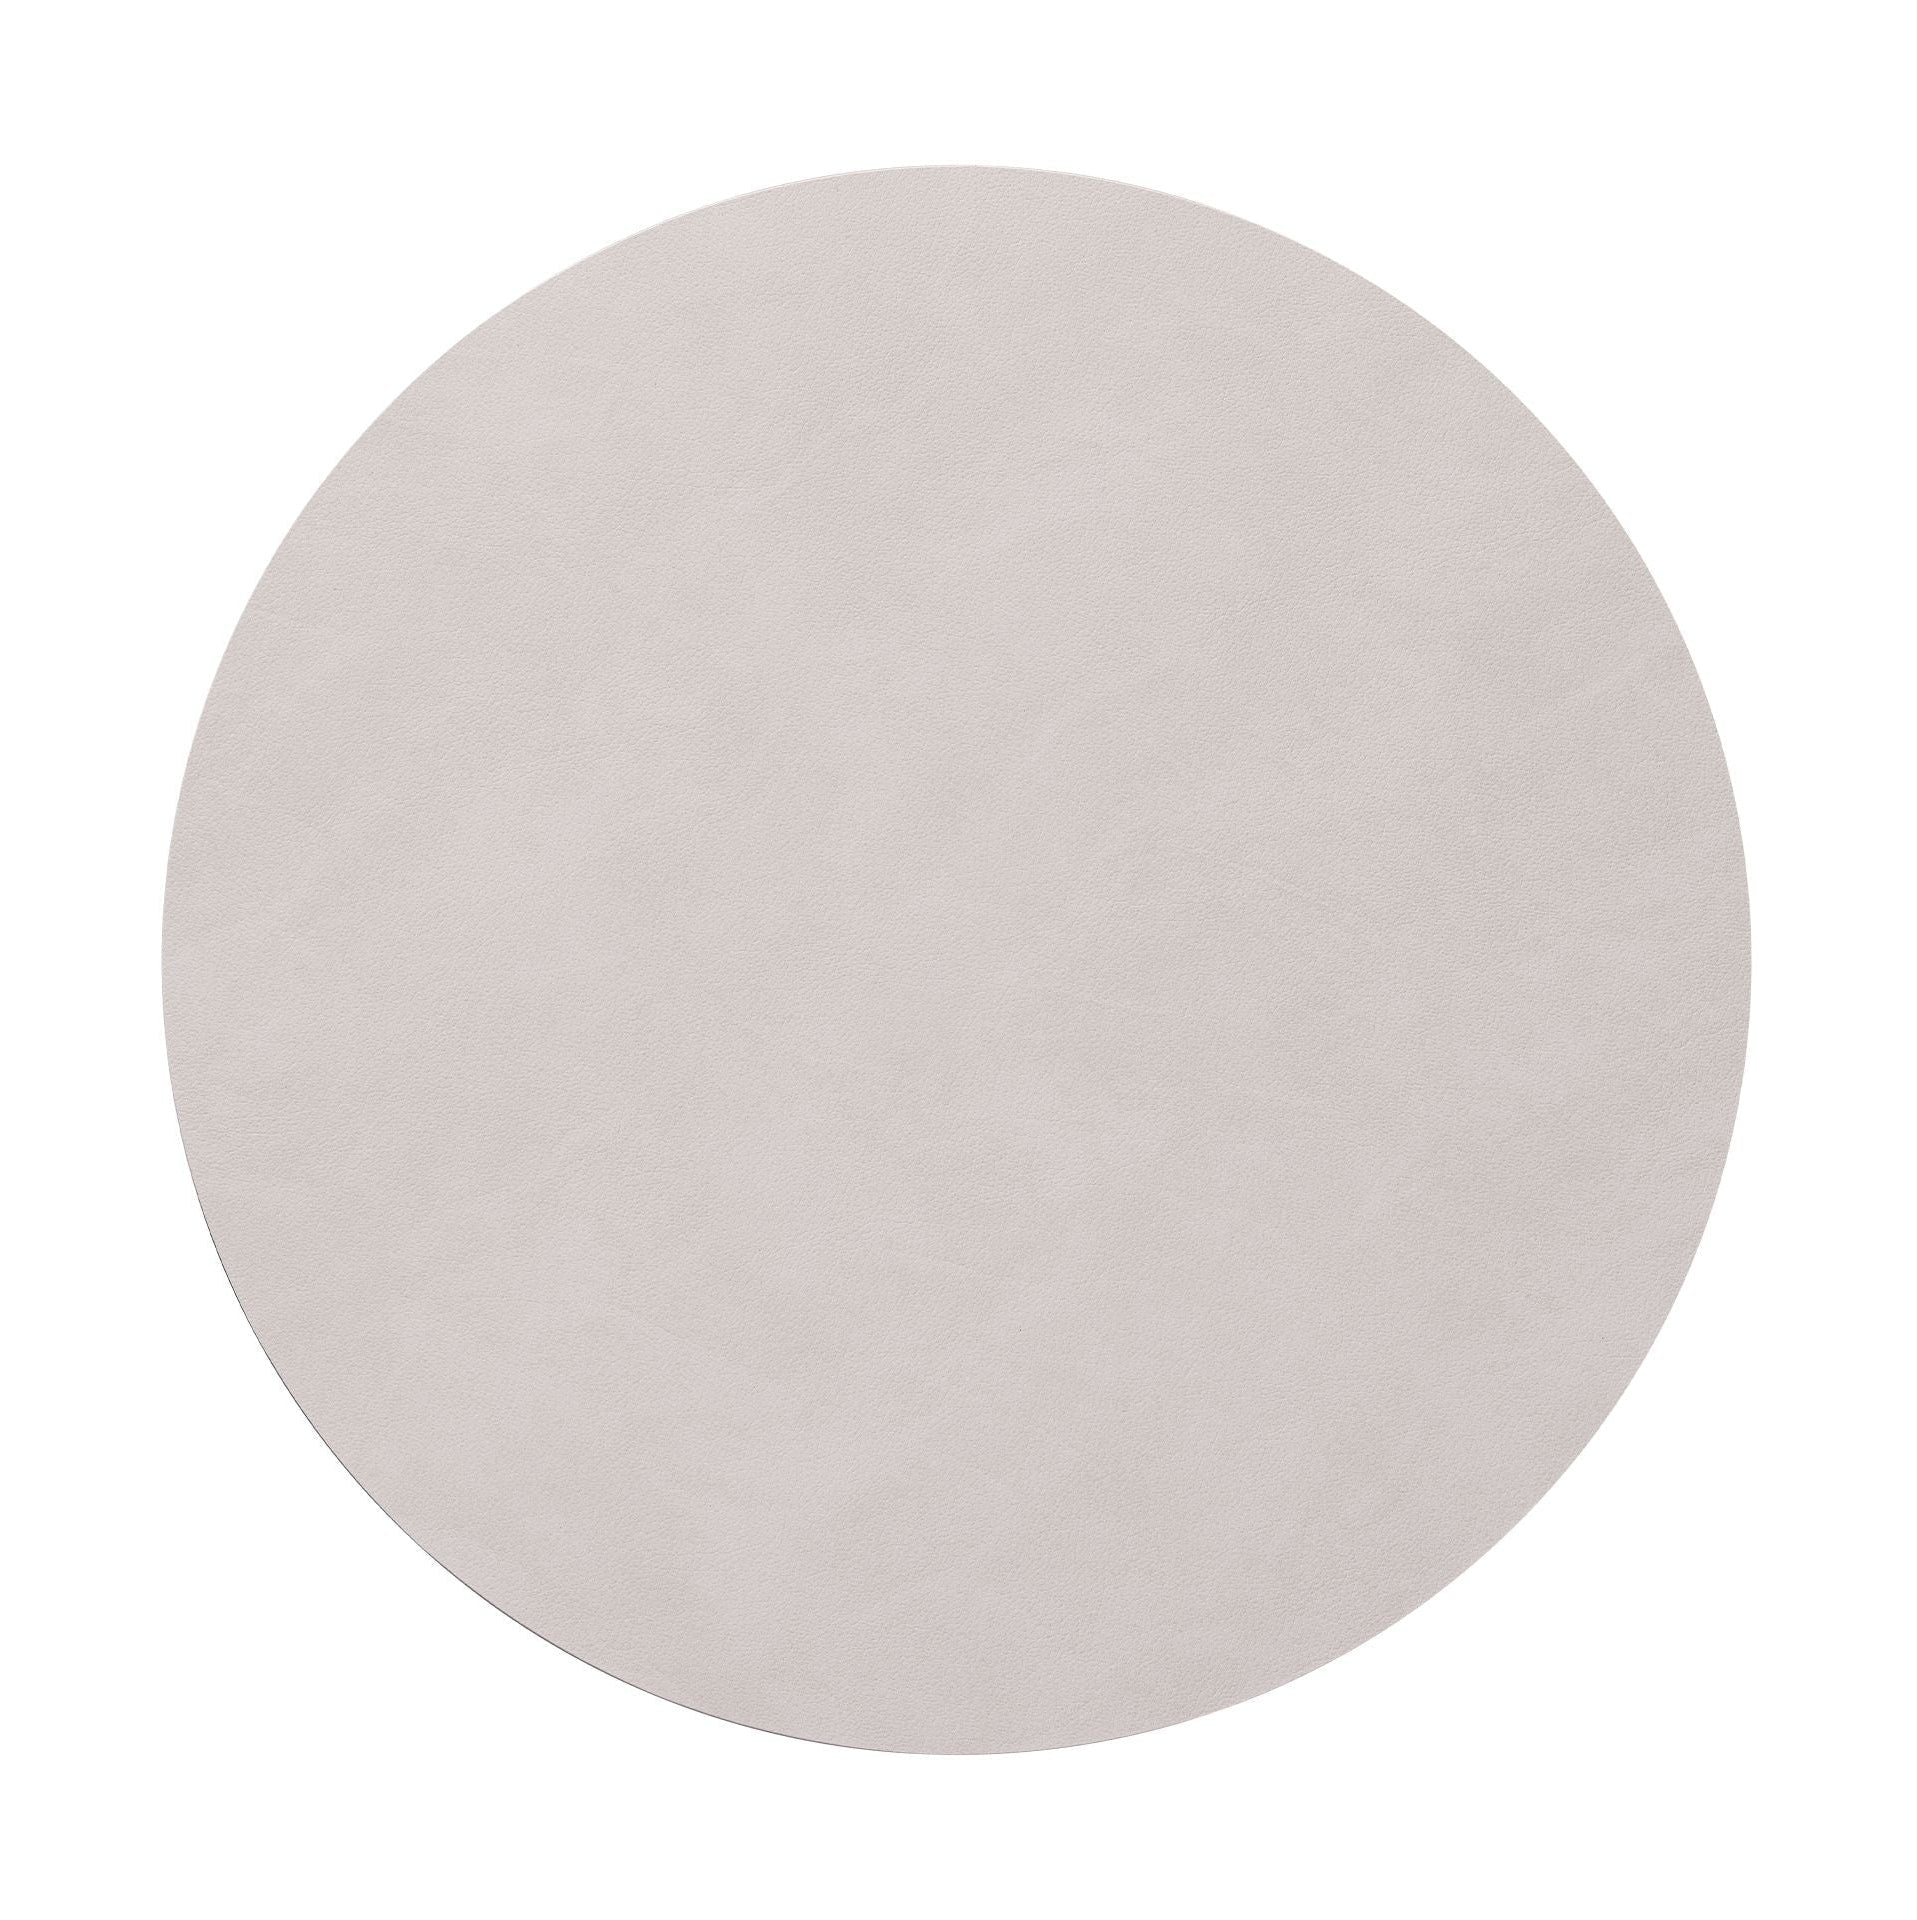 Lind DNA Bord MAT CIRCLE XL, Oyster White